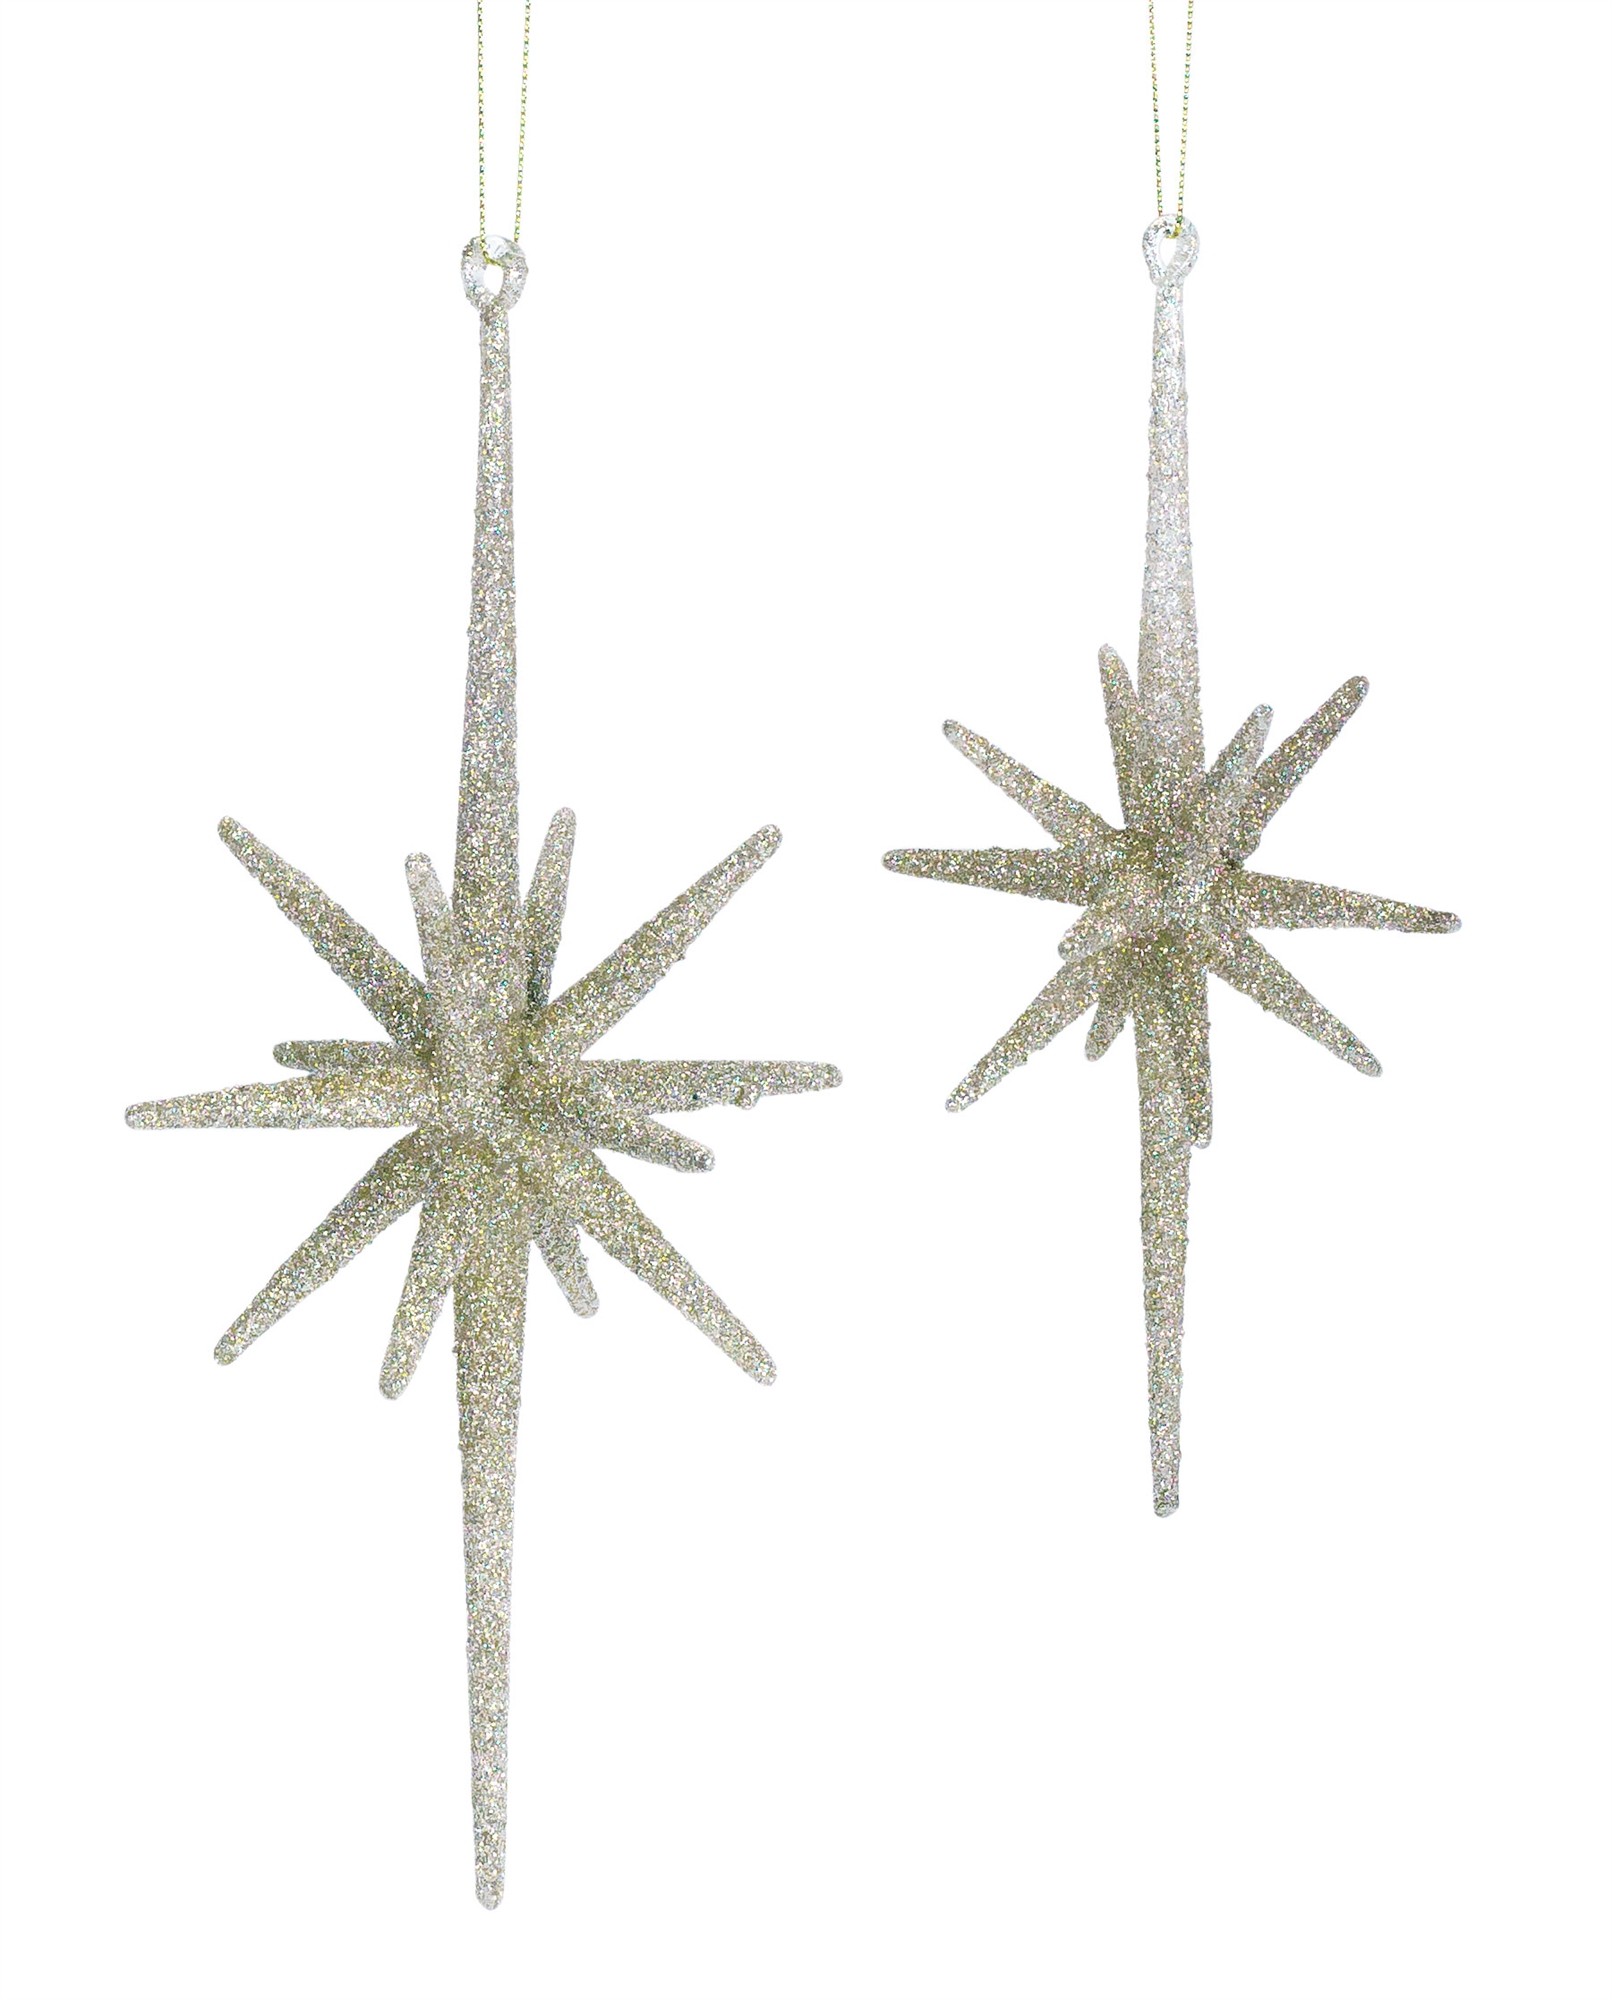 Star Ornament (Set of 2) 8"H, 9.75"H Glass